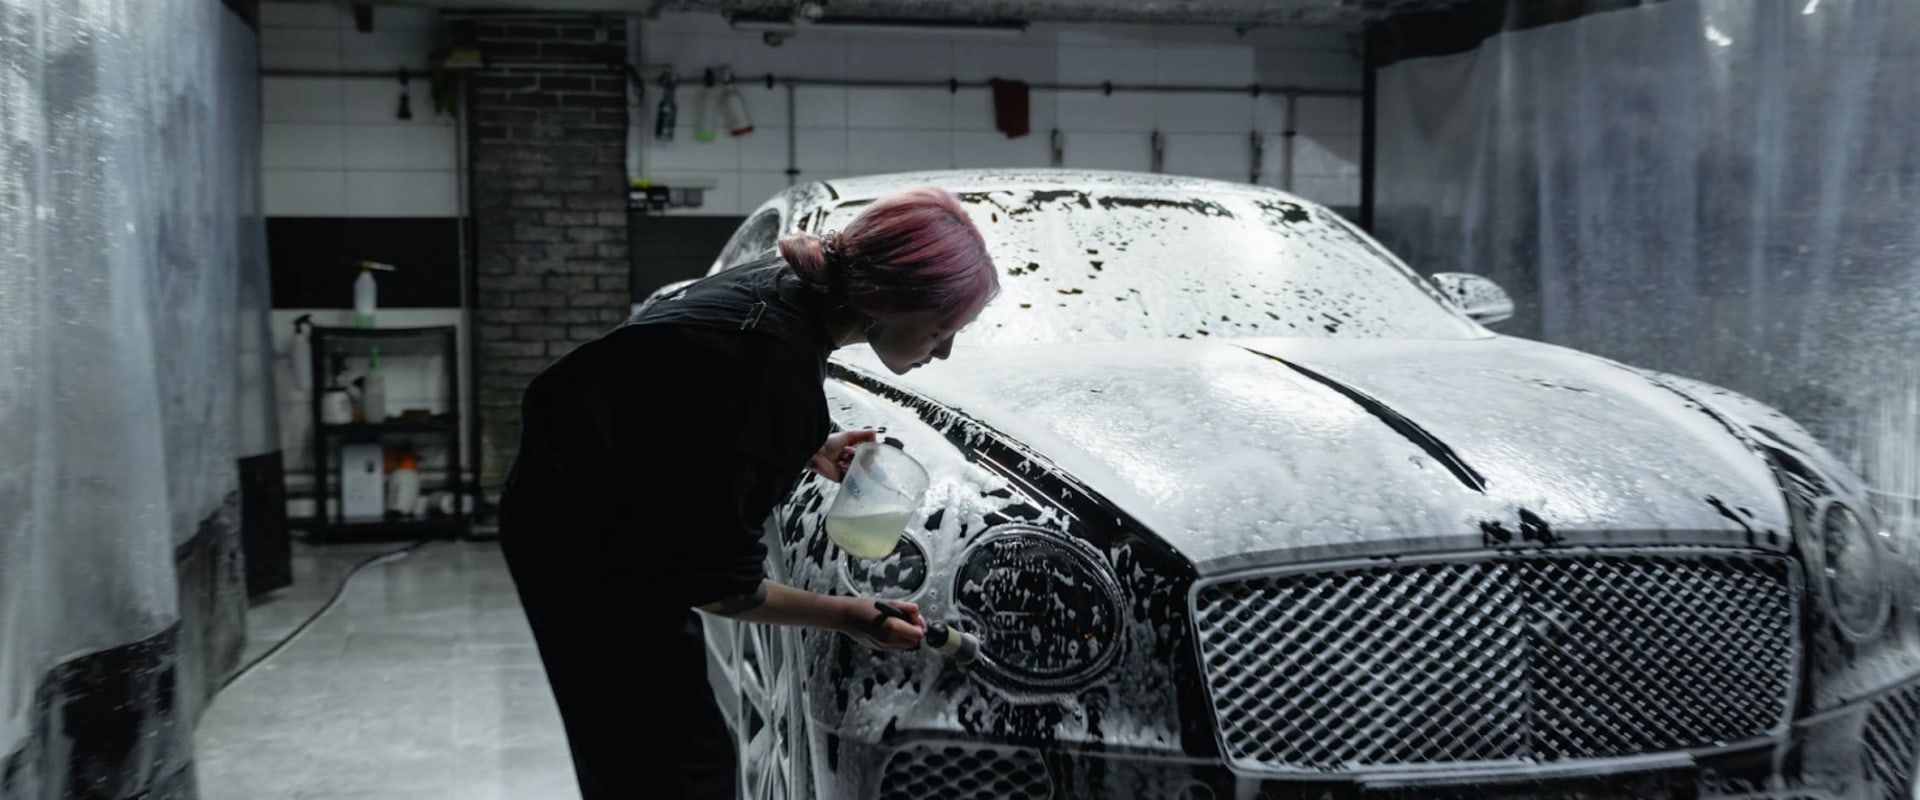 How profitable is a car detailing business?